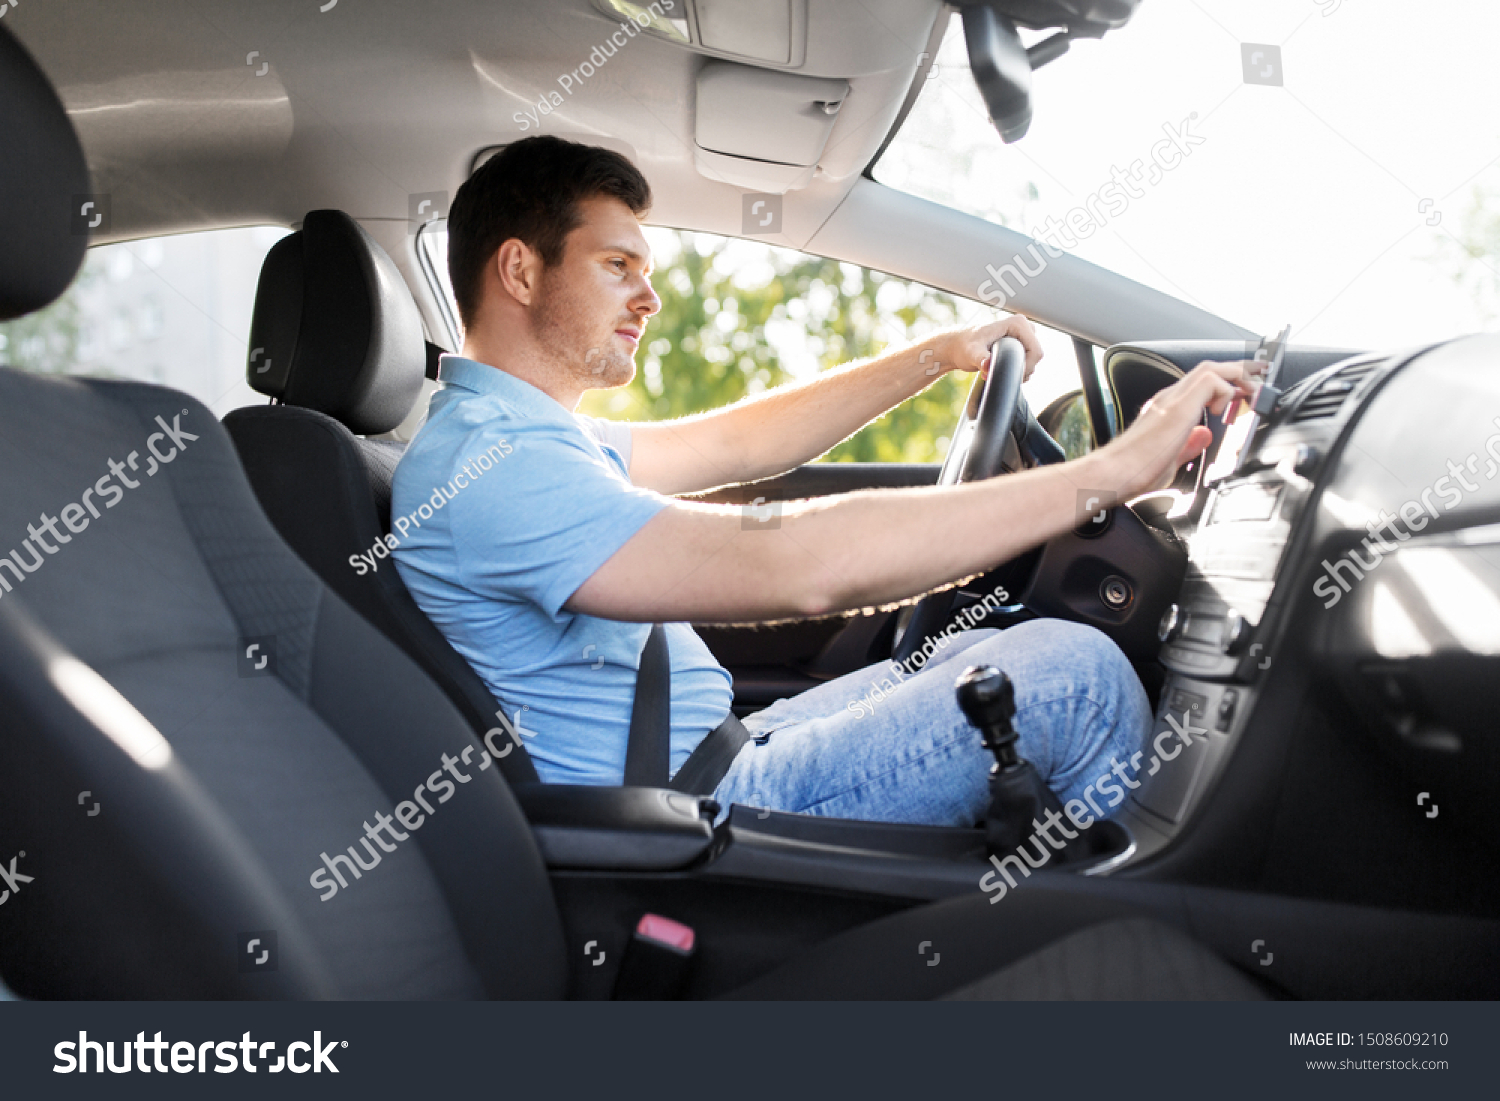 transport, vehicle and people concept - man or driver driving car and using gps navigator #1508609210